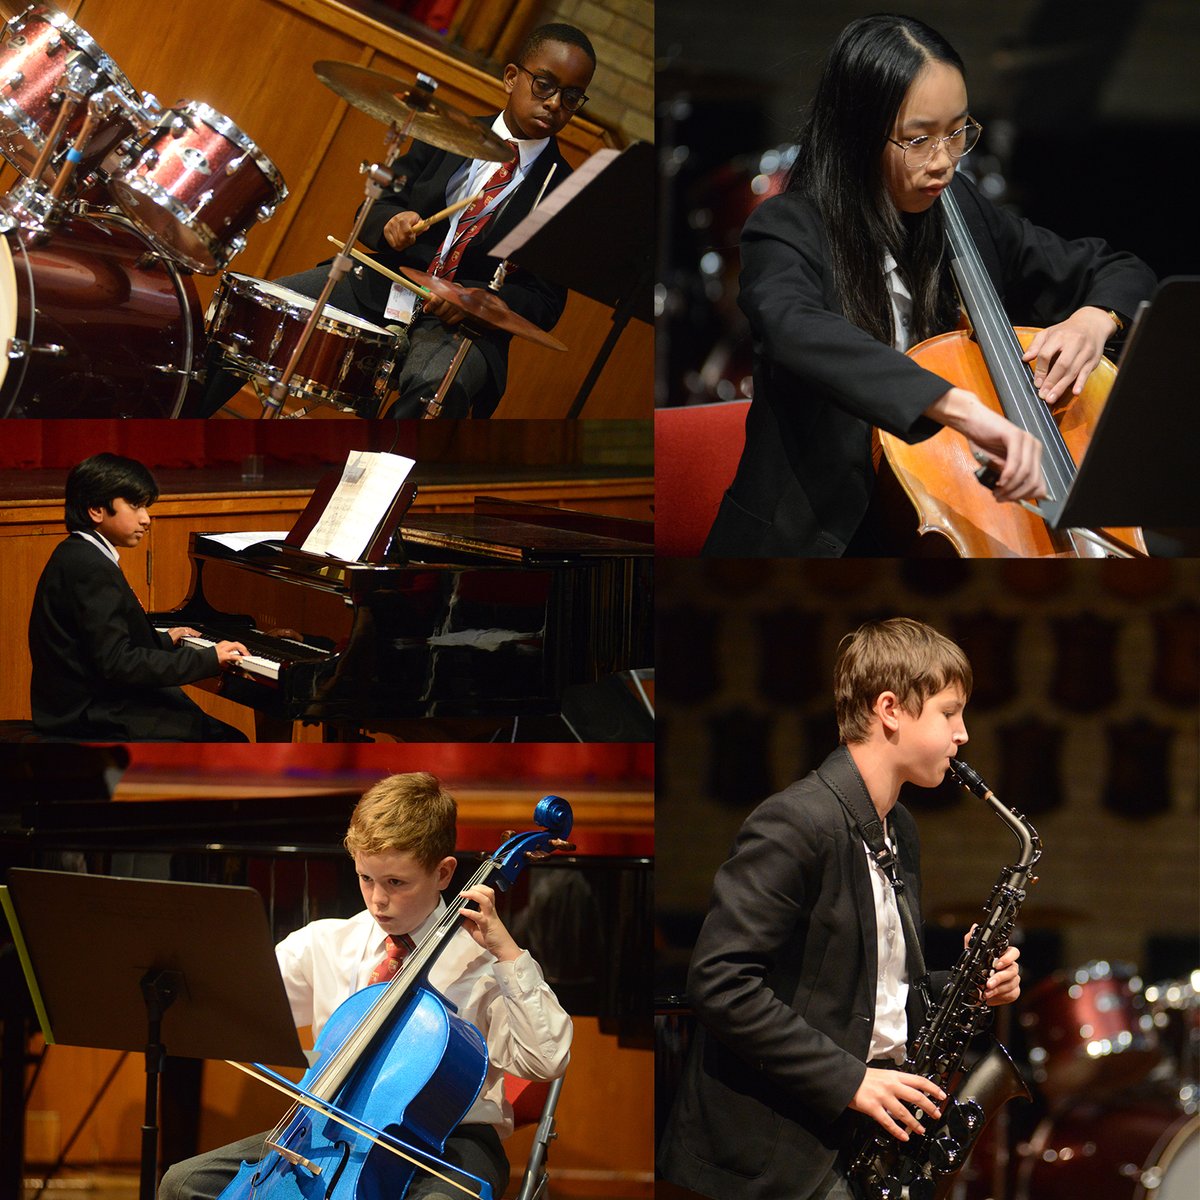 Last week we saw the first Scholar's concert of the year. It was a delight to hear individual repertoire from all our Senior School years and across all musical styles from heavy rock through to classical. We look forward to our Autumn Concert on Monday 16 October.
#KHVIIISpark